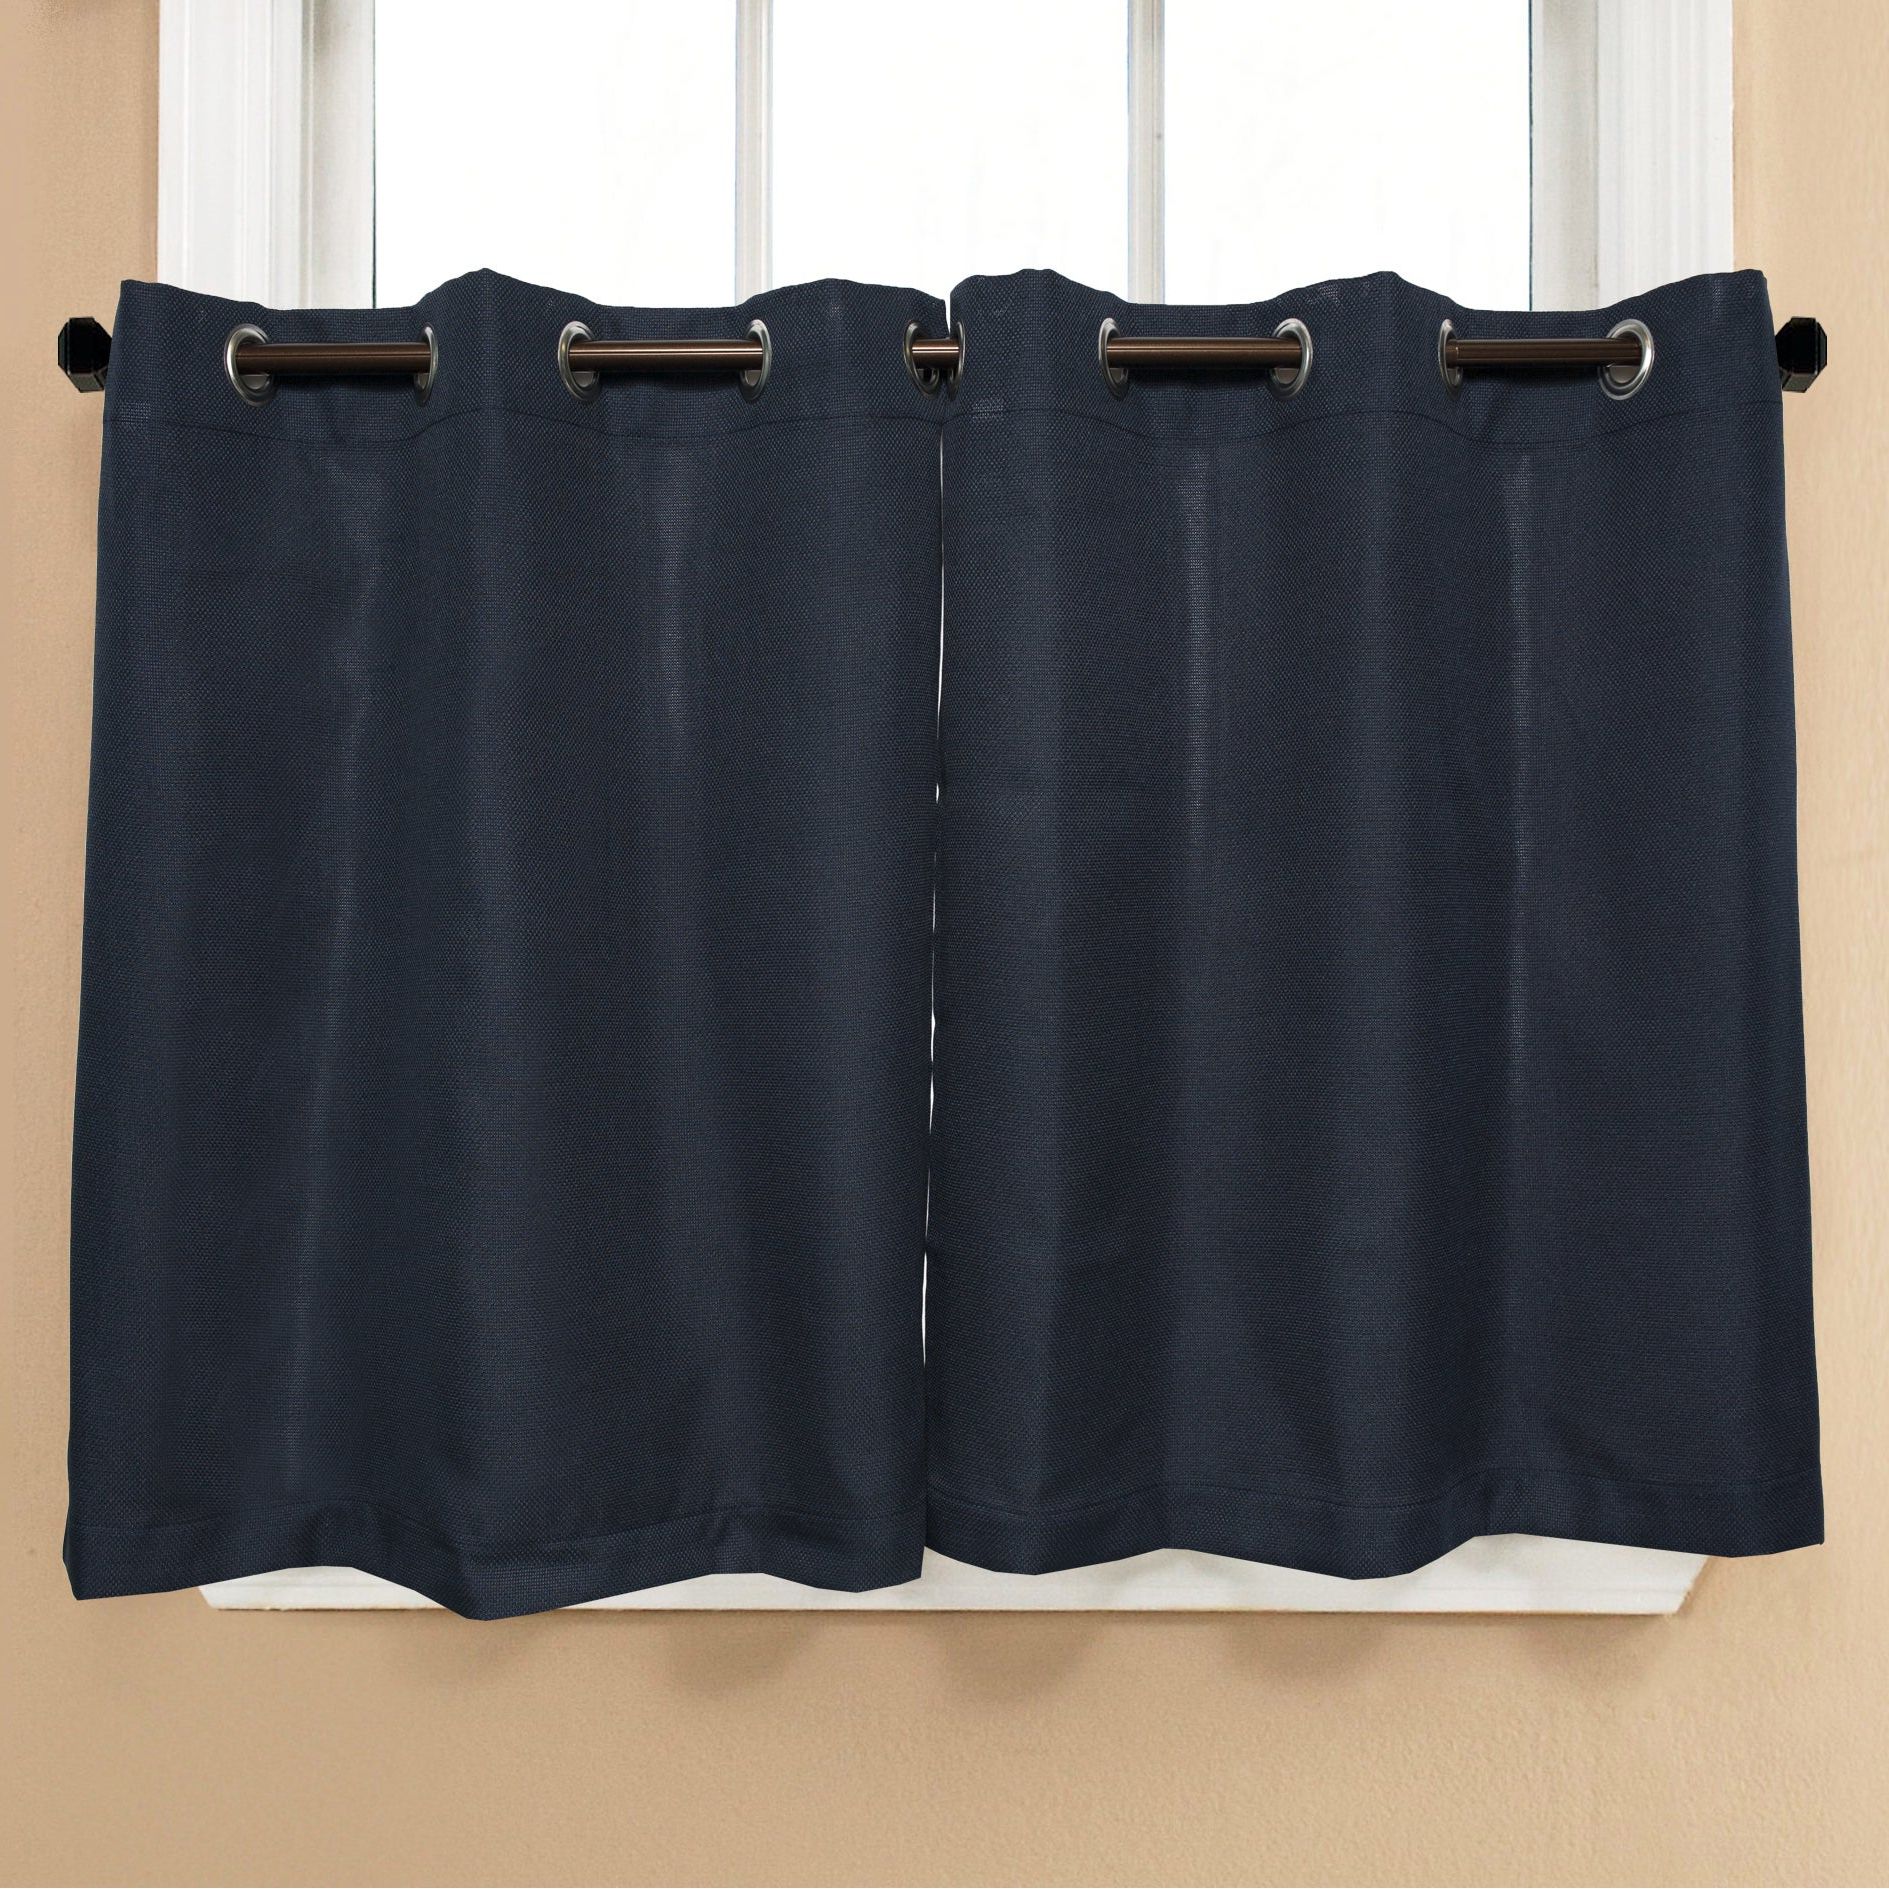 Modern Subtle Texture Solid White Kitchen Curtain Parts With Grommets Tier And Valance Options Within Fashionable Modern Subtle Texture Solid Navy Kitchen Curtain Parts With Grommets  Tier  And Valance Options (View 7 of 20)